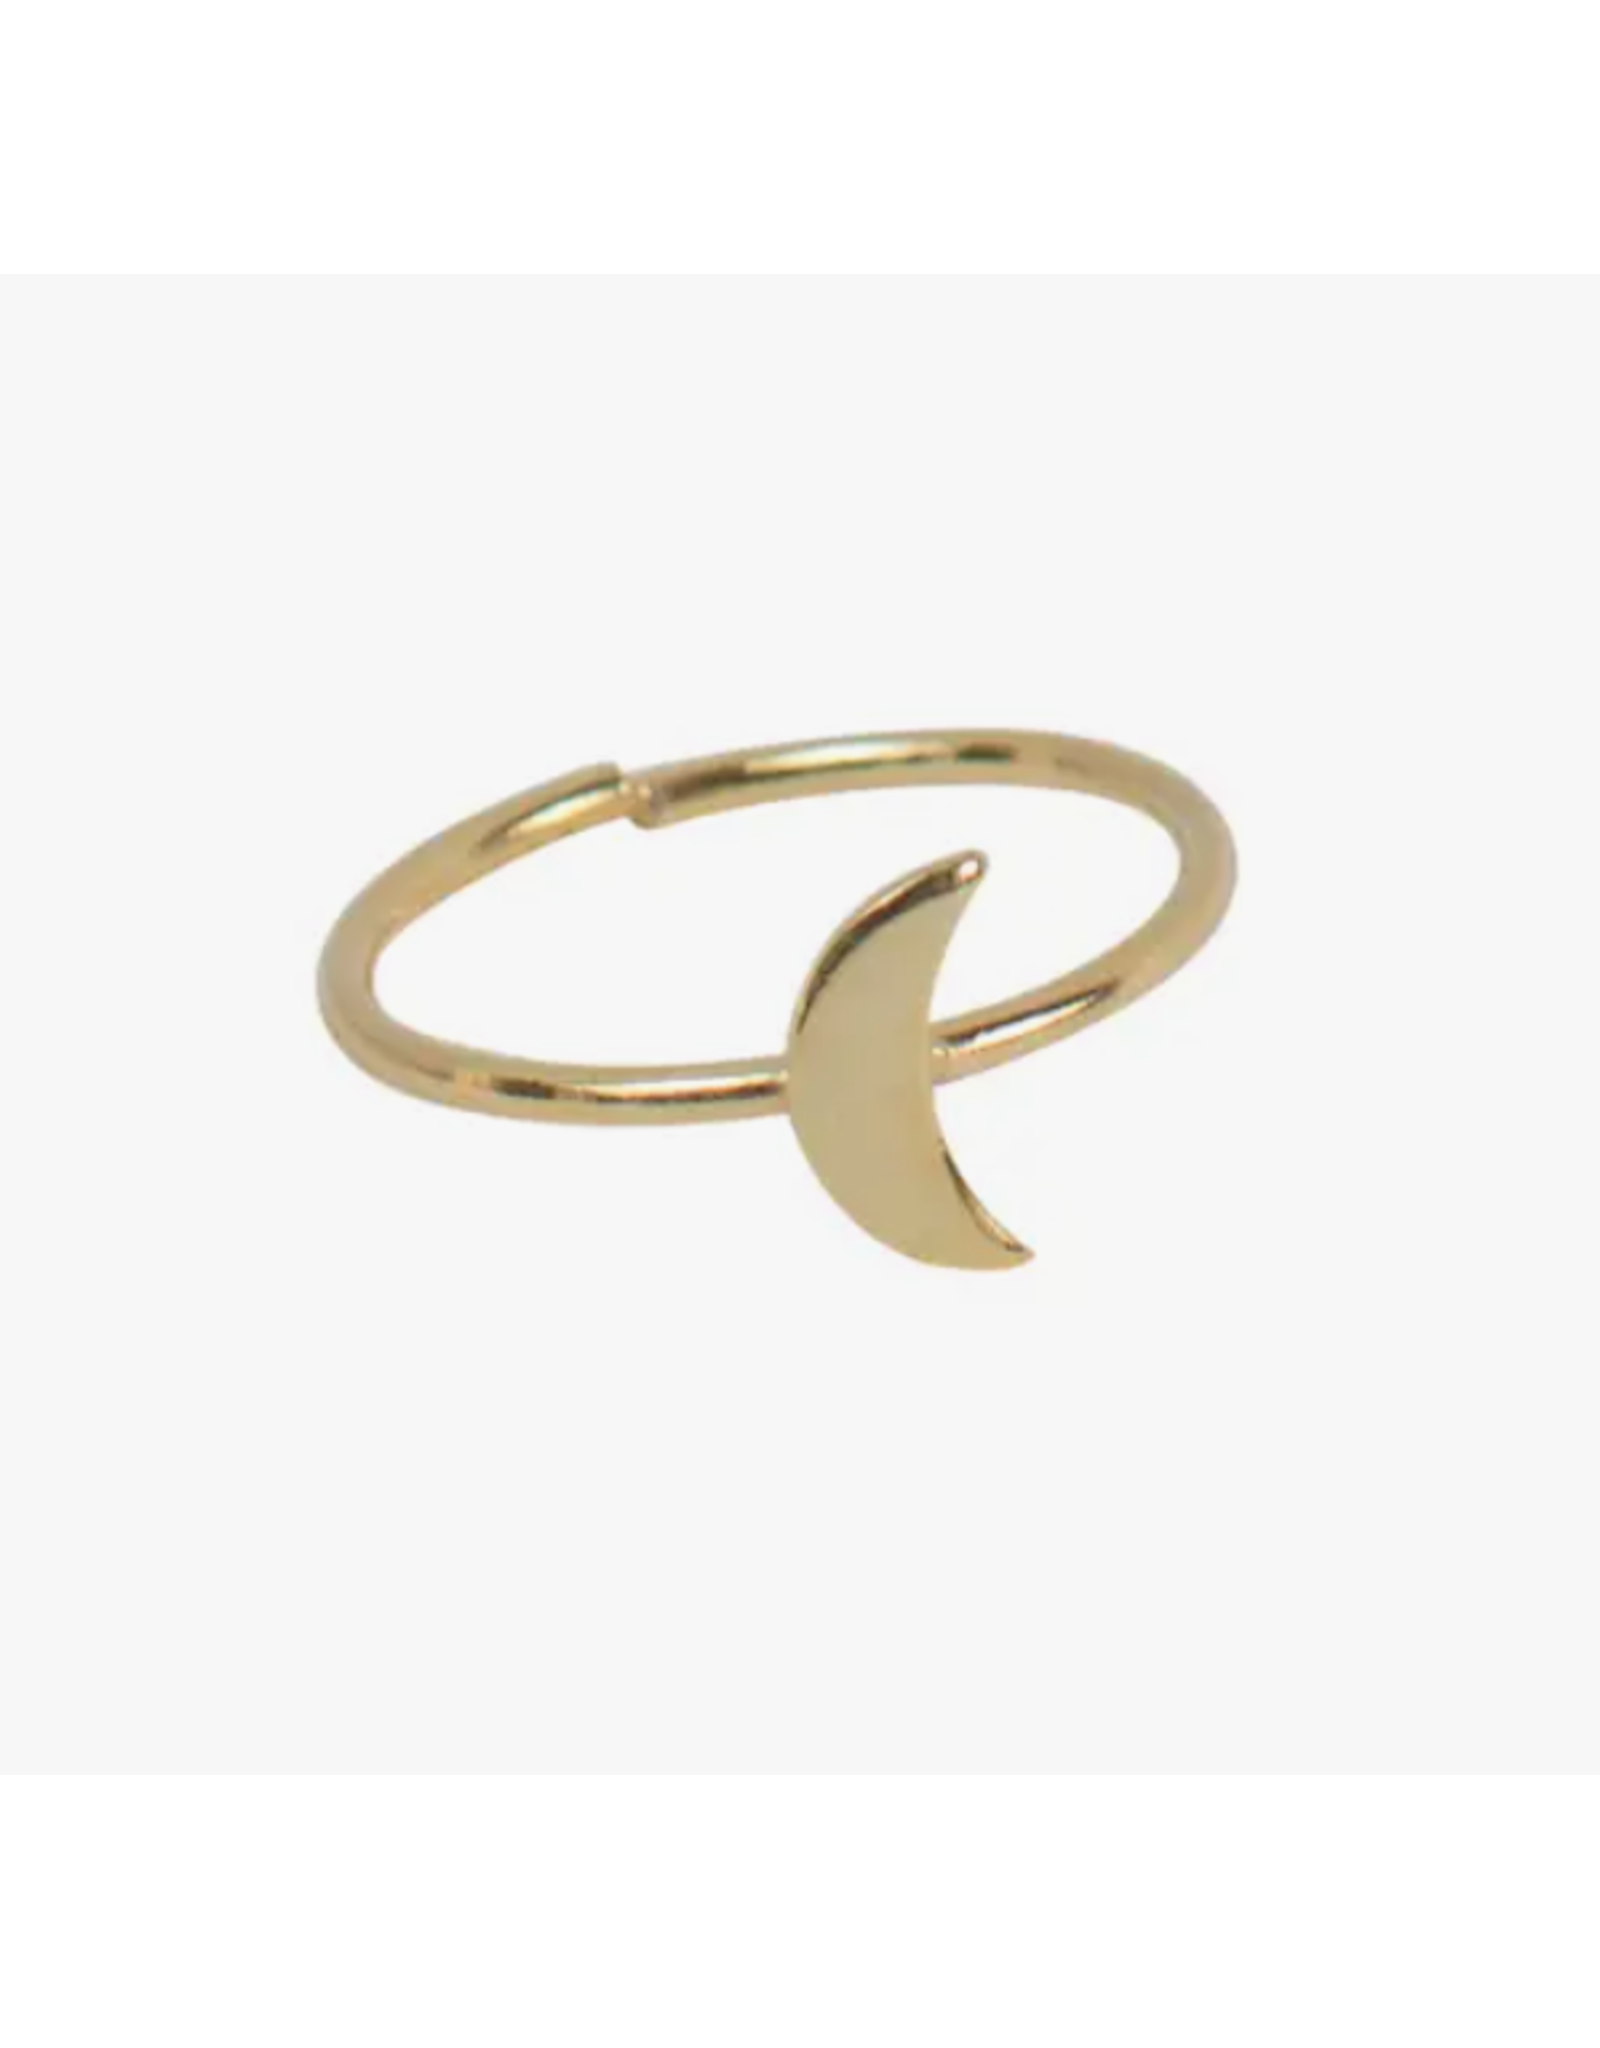 India Crescent Moon Ring (brass), India